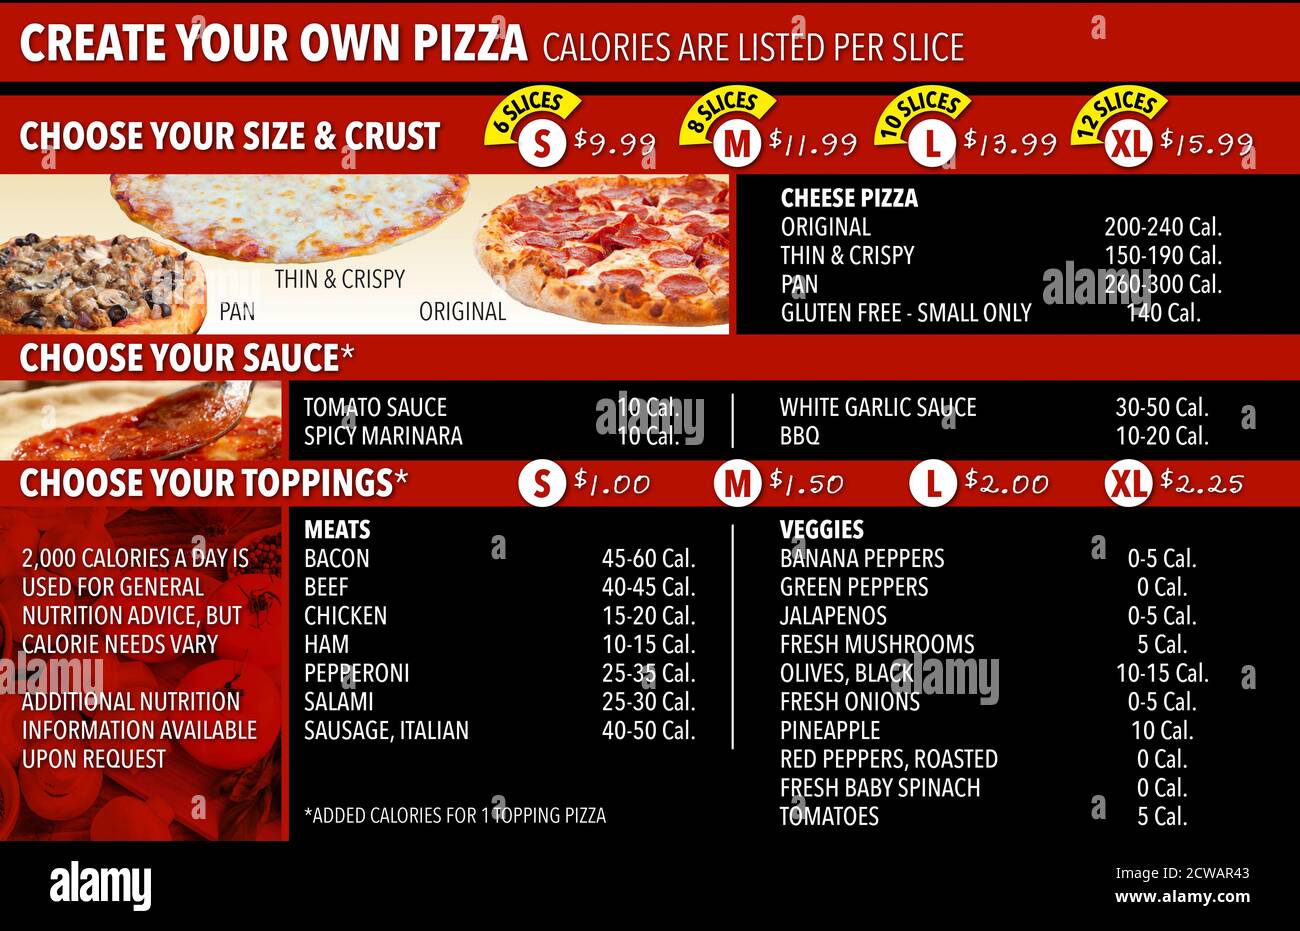 Declaring Calories for Build-Your-Own Pizza: Column Format Calories for build-you-own pizzas may be declared in multiple ways for greater flexibility. Calories can be declared for the entire pizza or per slice, provided the number of slices per pie is included on the menu or menu board. When more than two sizes of the pizza are available, calories can be declared as a range (e.g., original cheese pizza 200-240 calories, pan cheese pizza 260-300 calories). Calories may also be declared as a range for each topping (e.g., bacon 45-60 calories, beef 40-45 calories) when more than two sizes of pizz Stock Photo